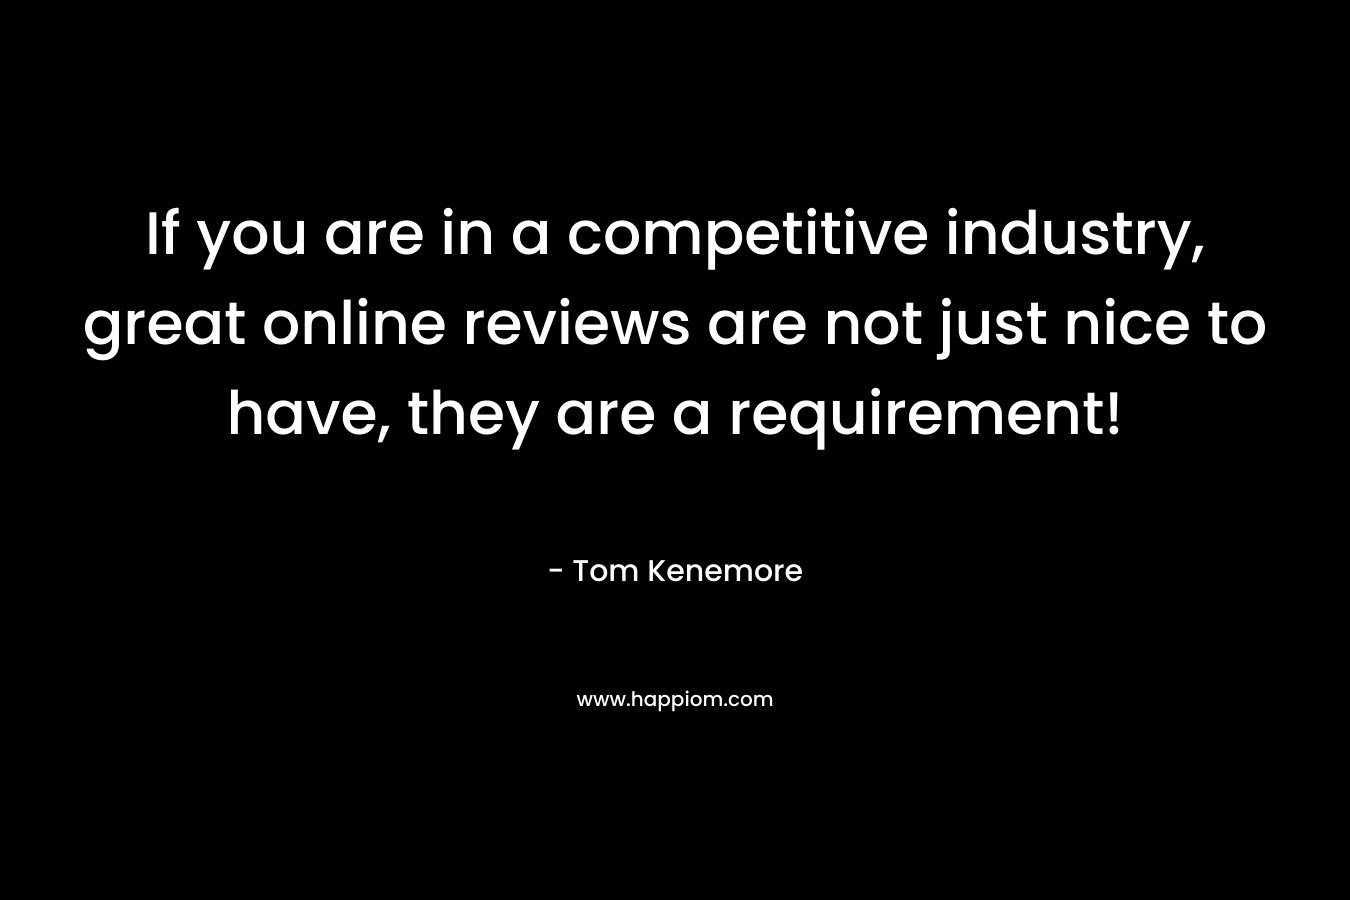 If you are in a competitive industry, great online reviews are not just nice to have, they are a requirement!